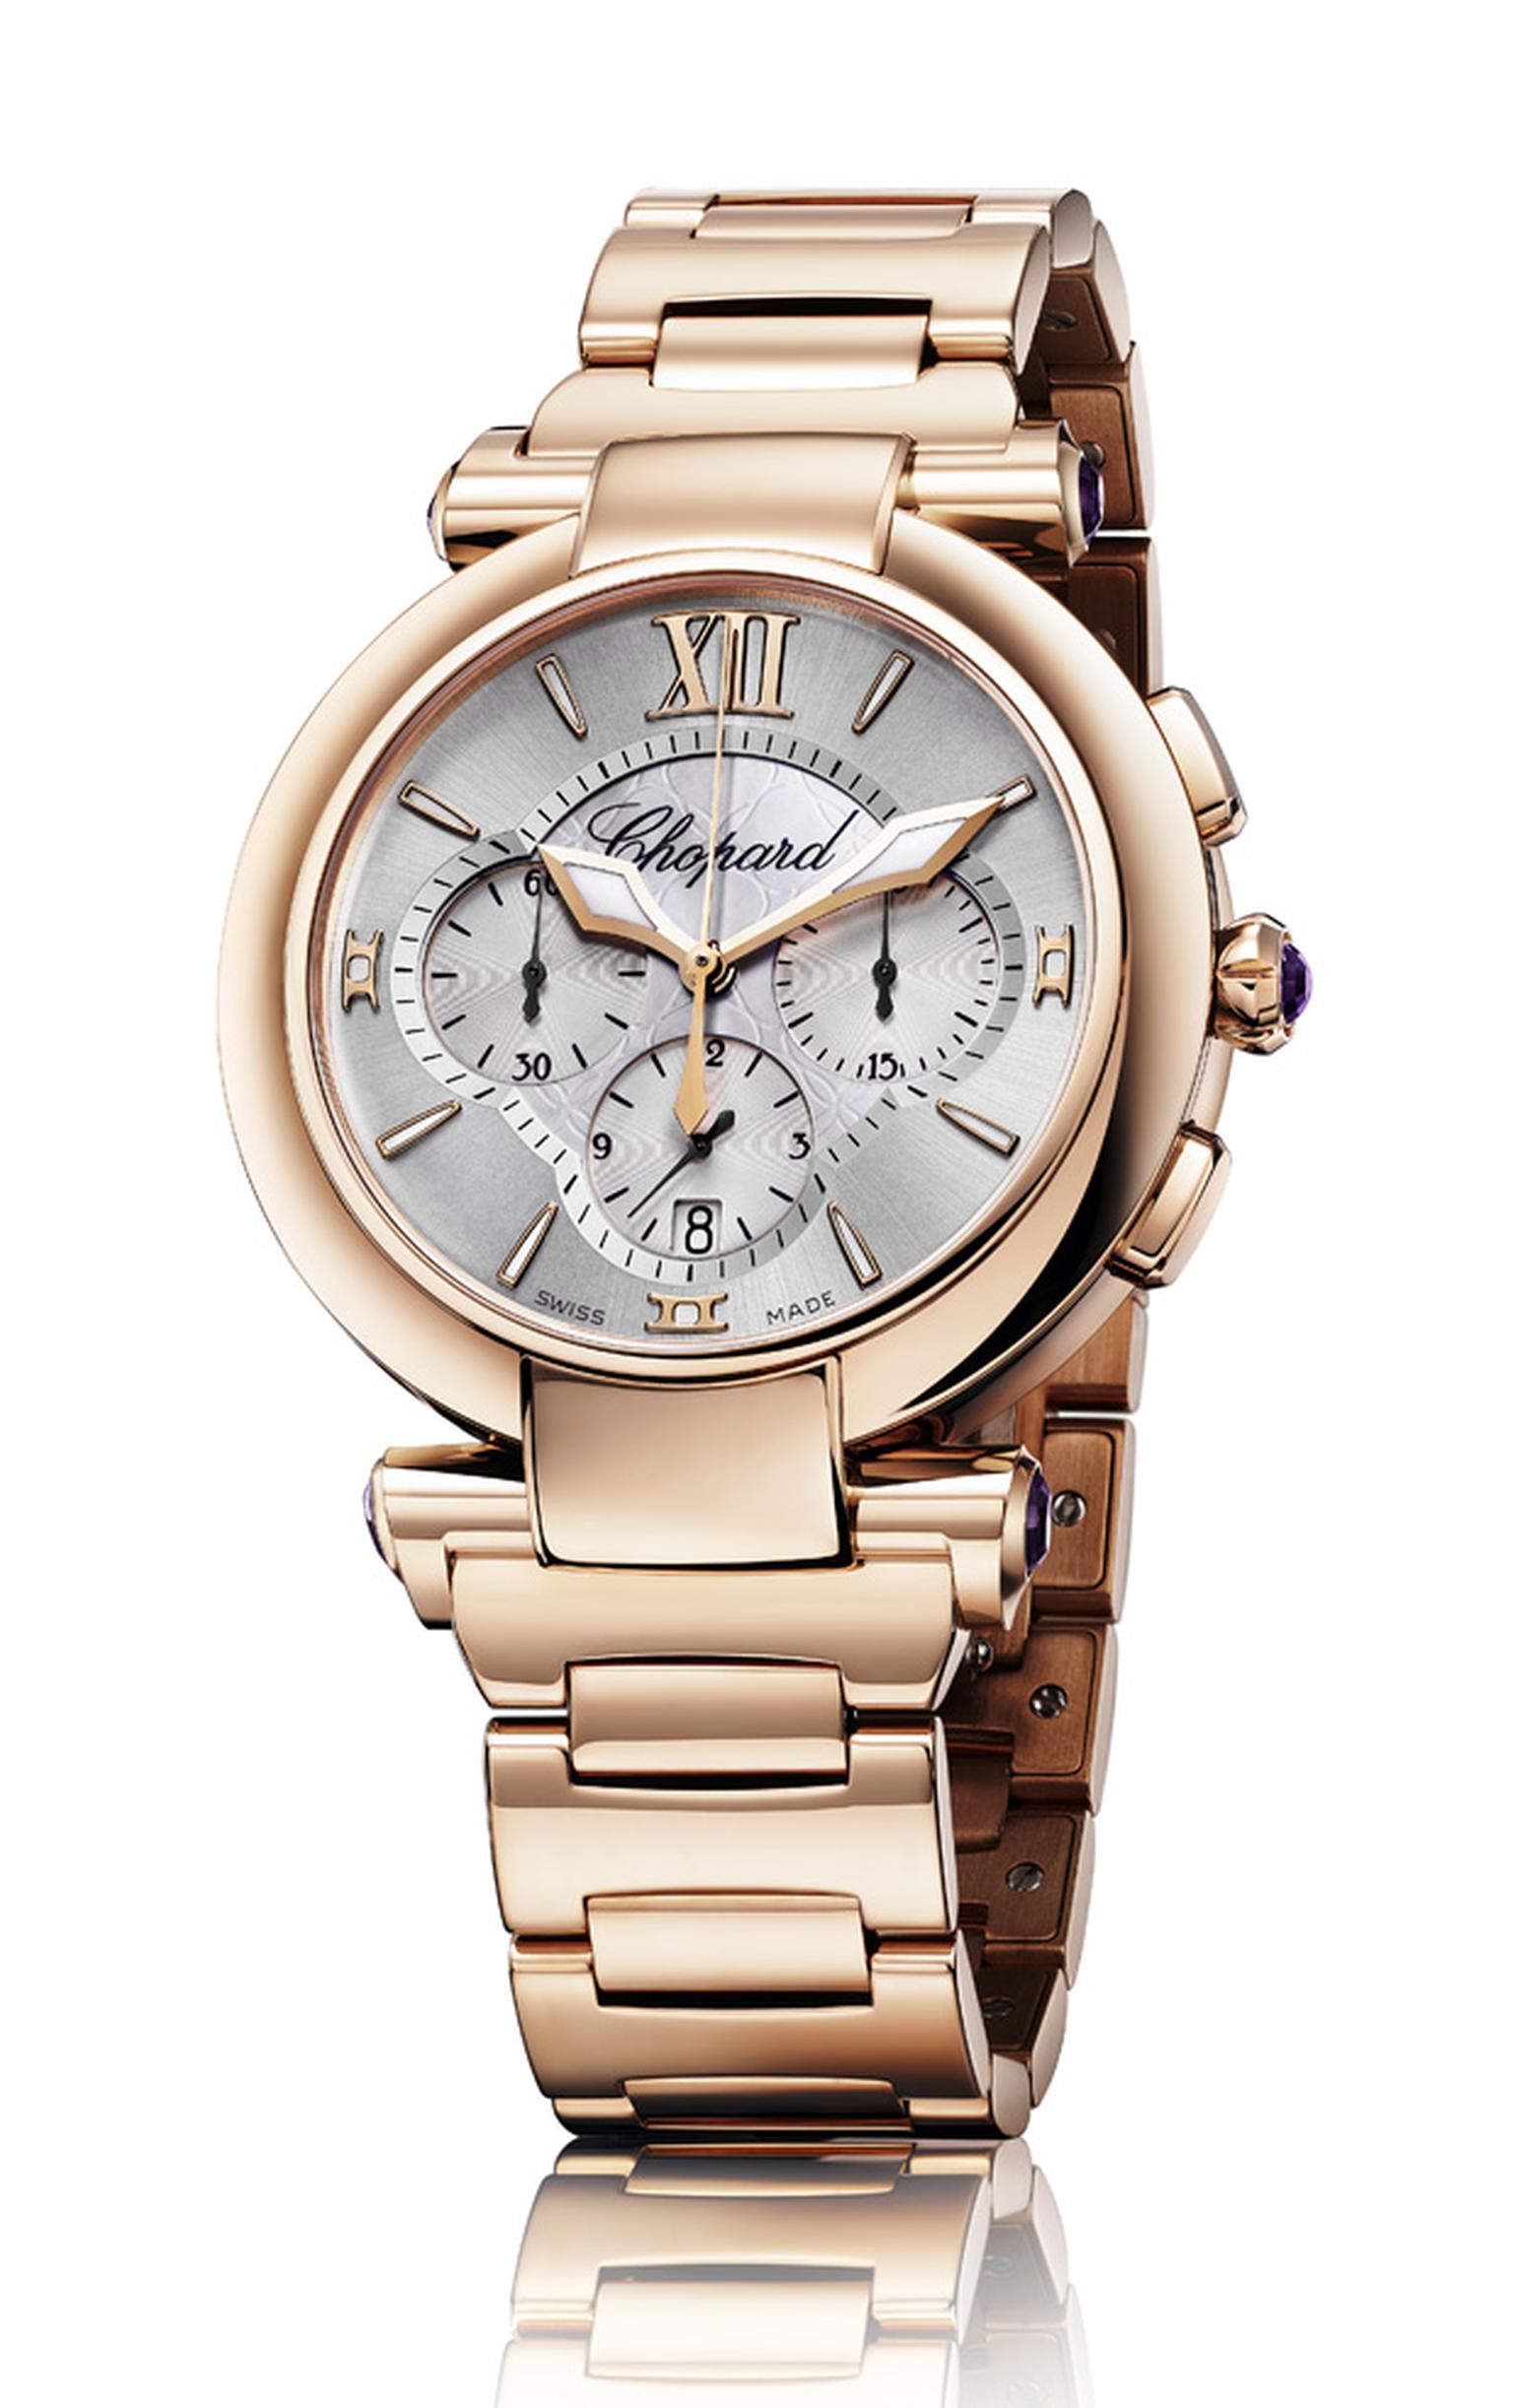 Chopard Imperiale rose gold automatic chronograph